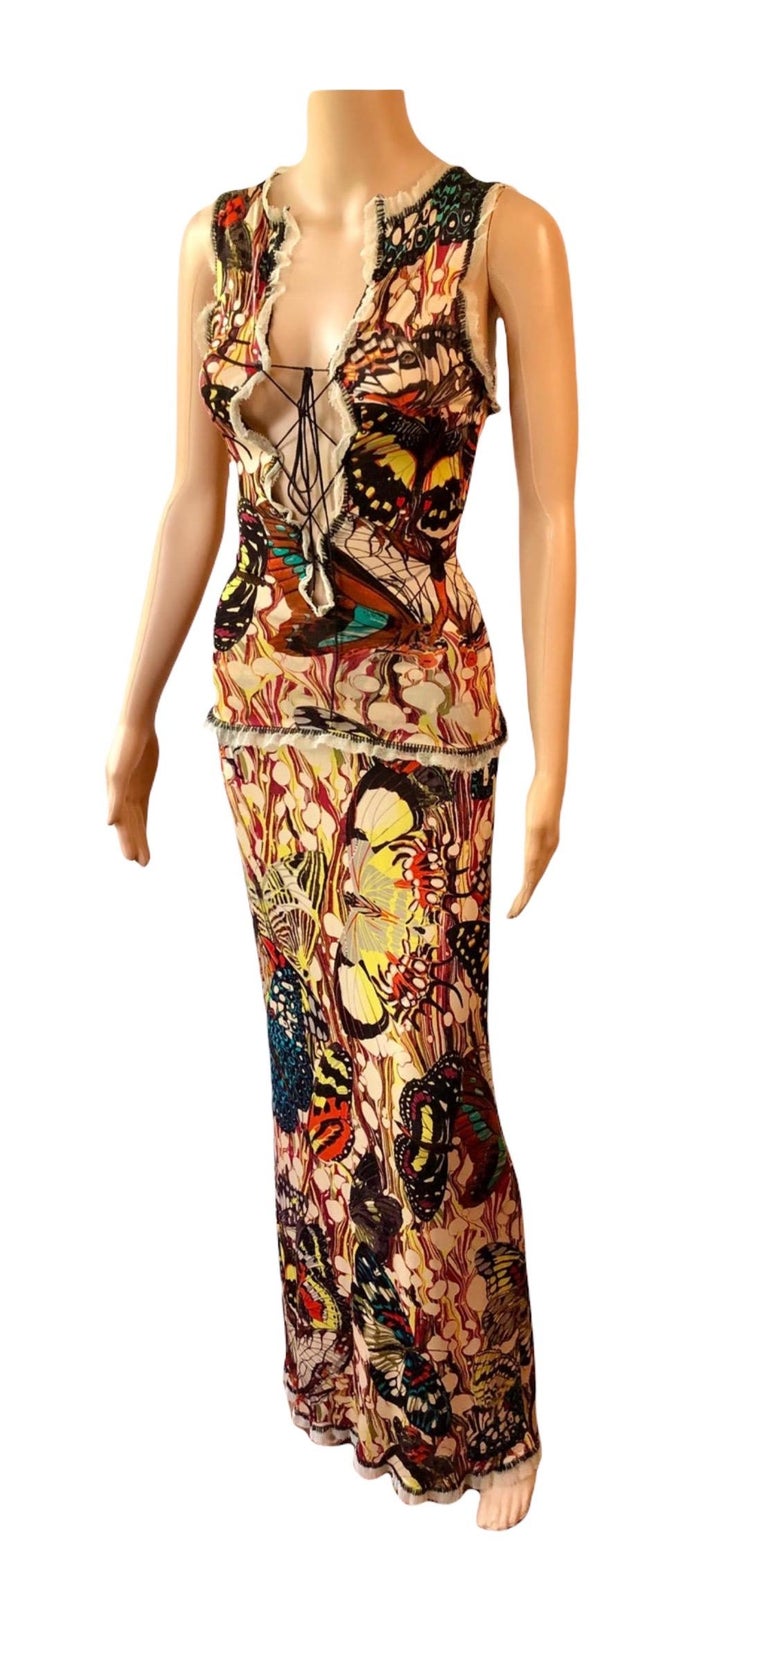 Jean Paul Gaultier S/S 2003 Butterfly Print Top and Skirt Ensemble 2 ...